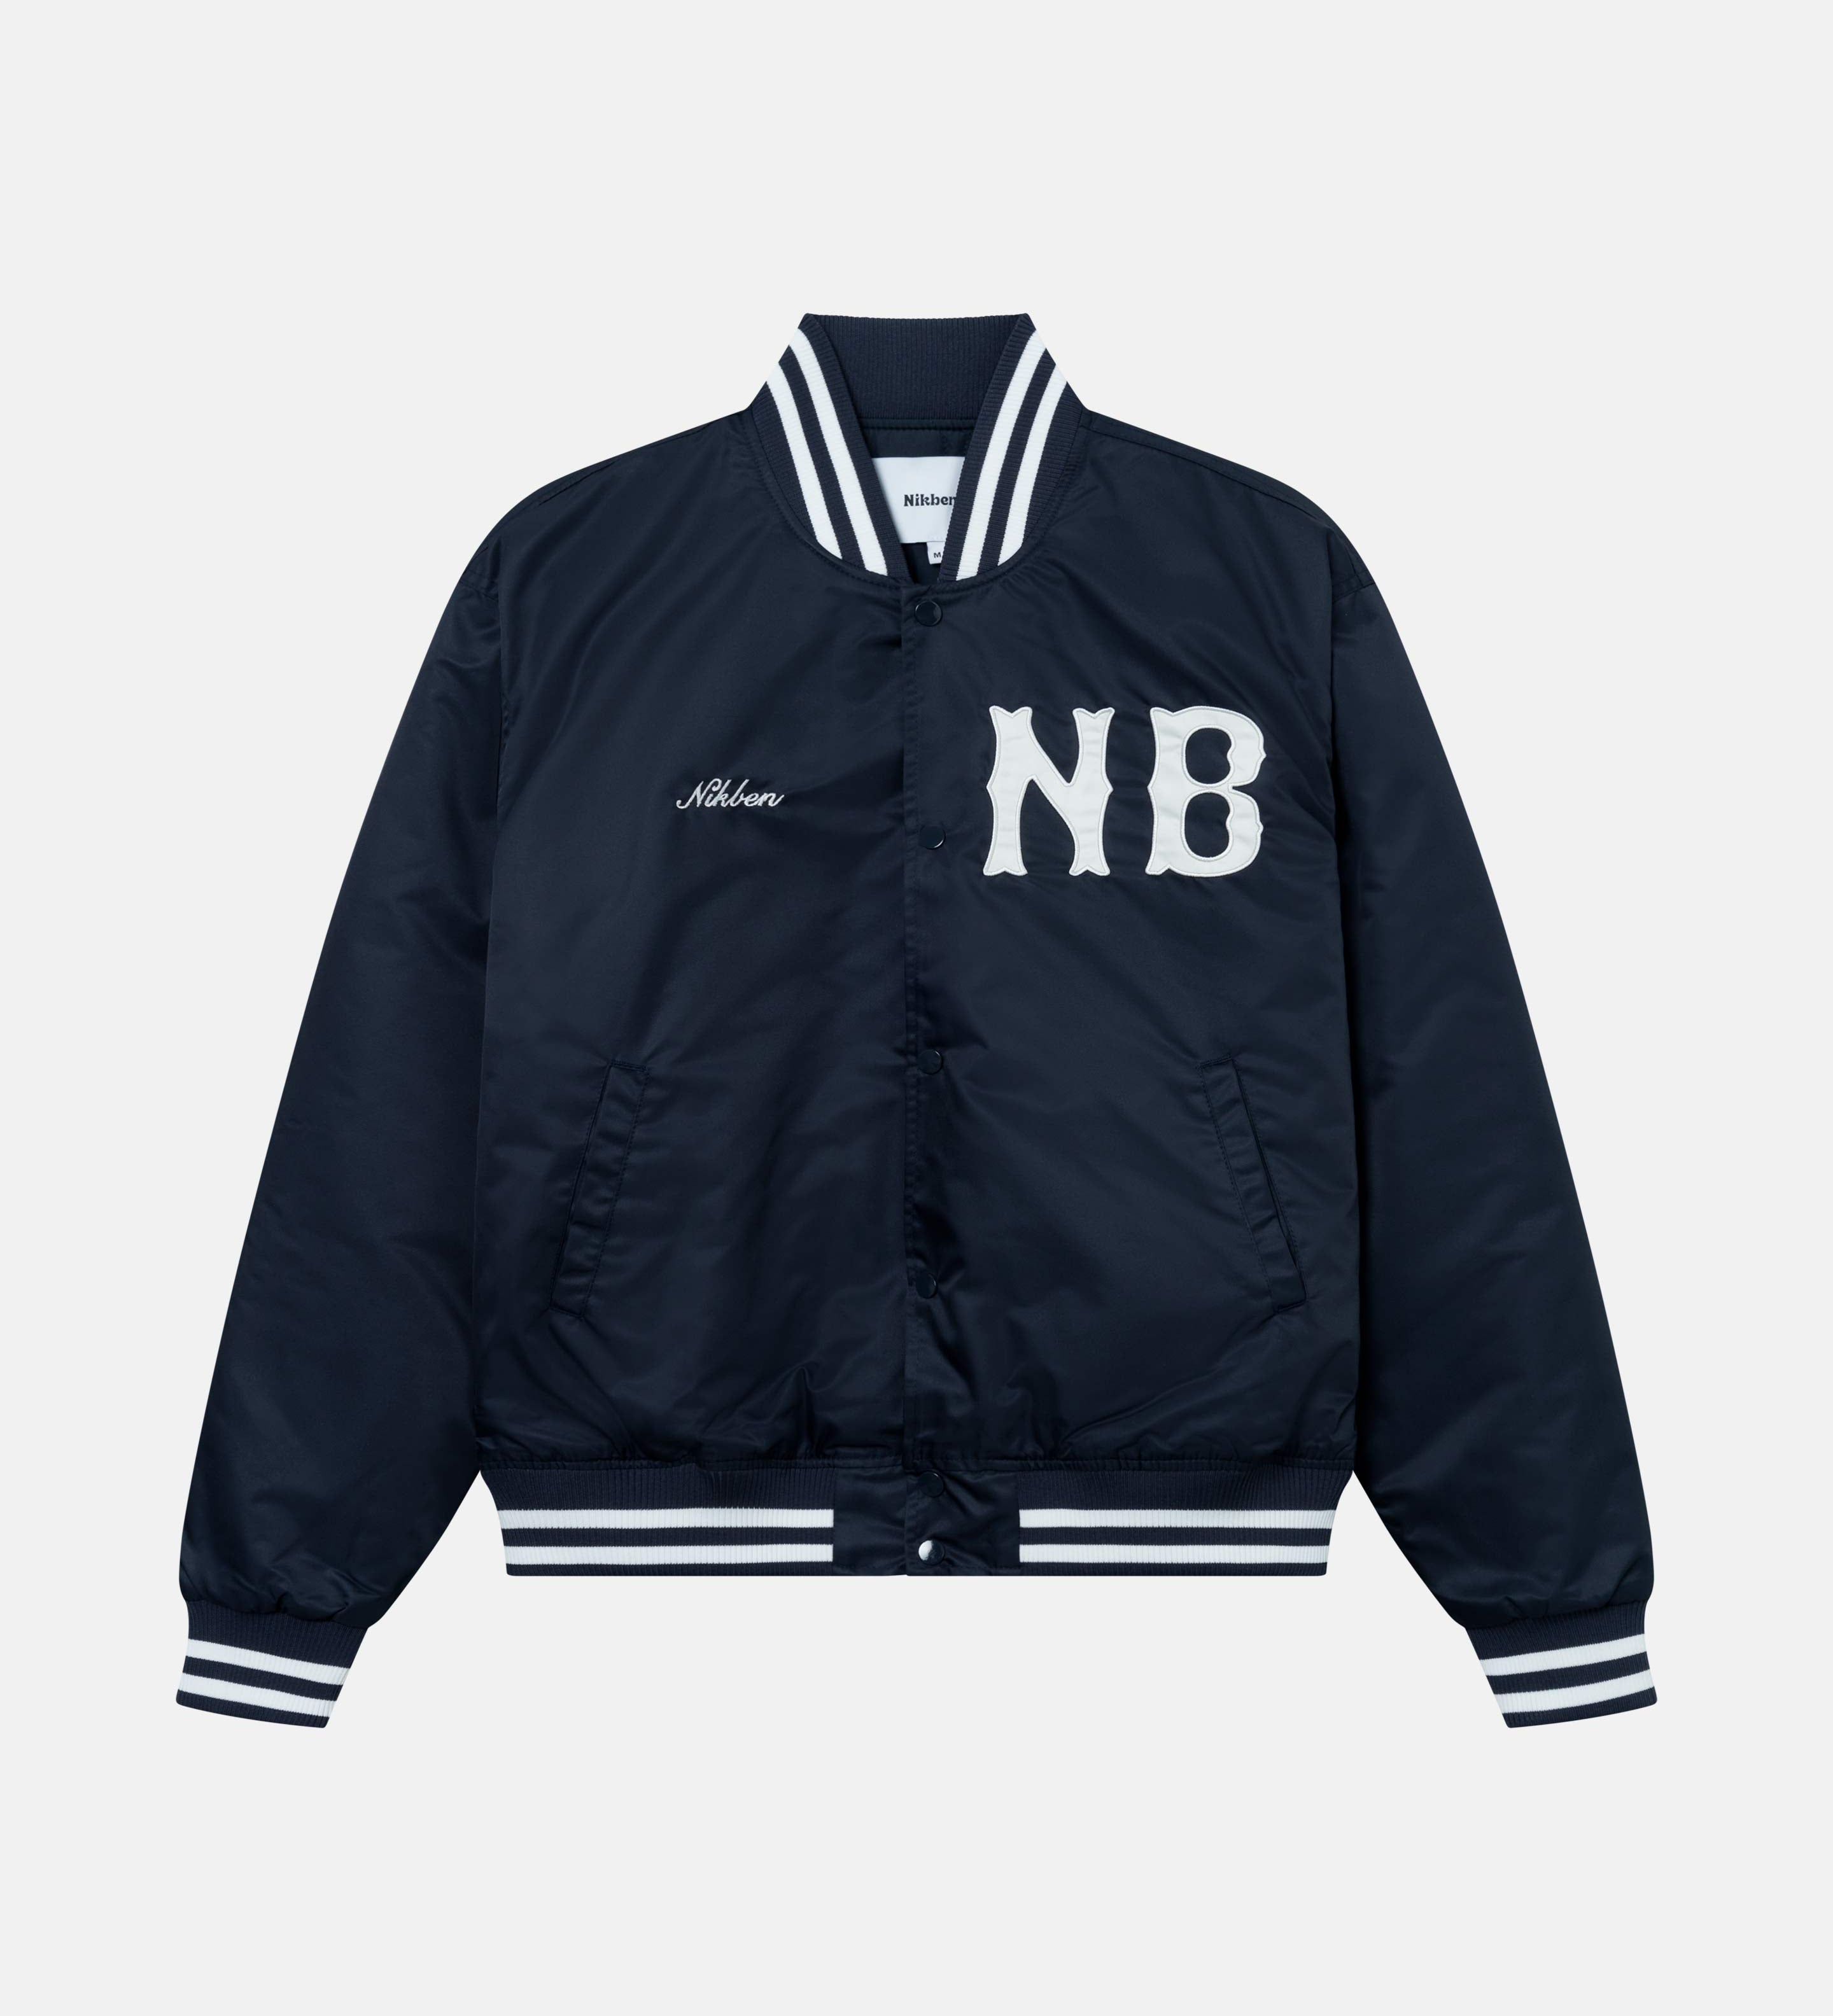 Navy Blue 80s style baseball jacket with embroidered "Nikben" script logo and "NB" logo